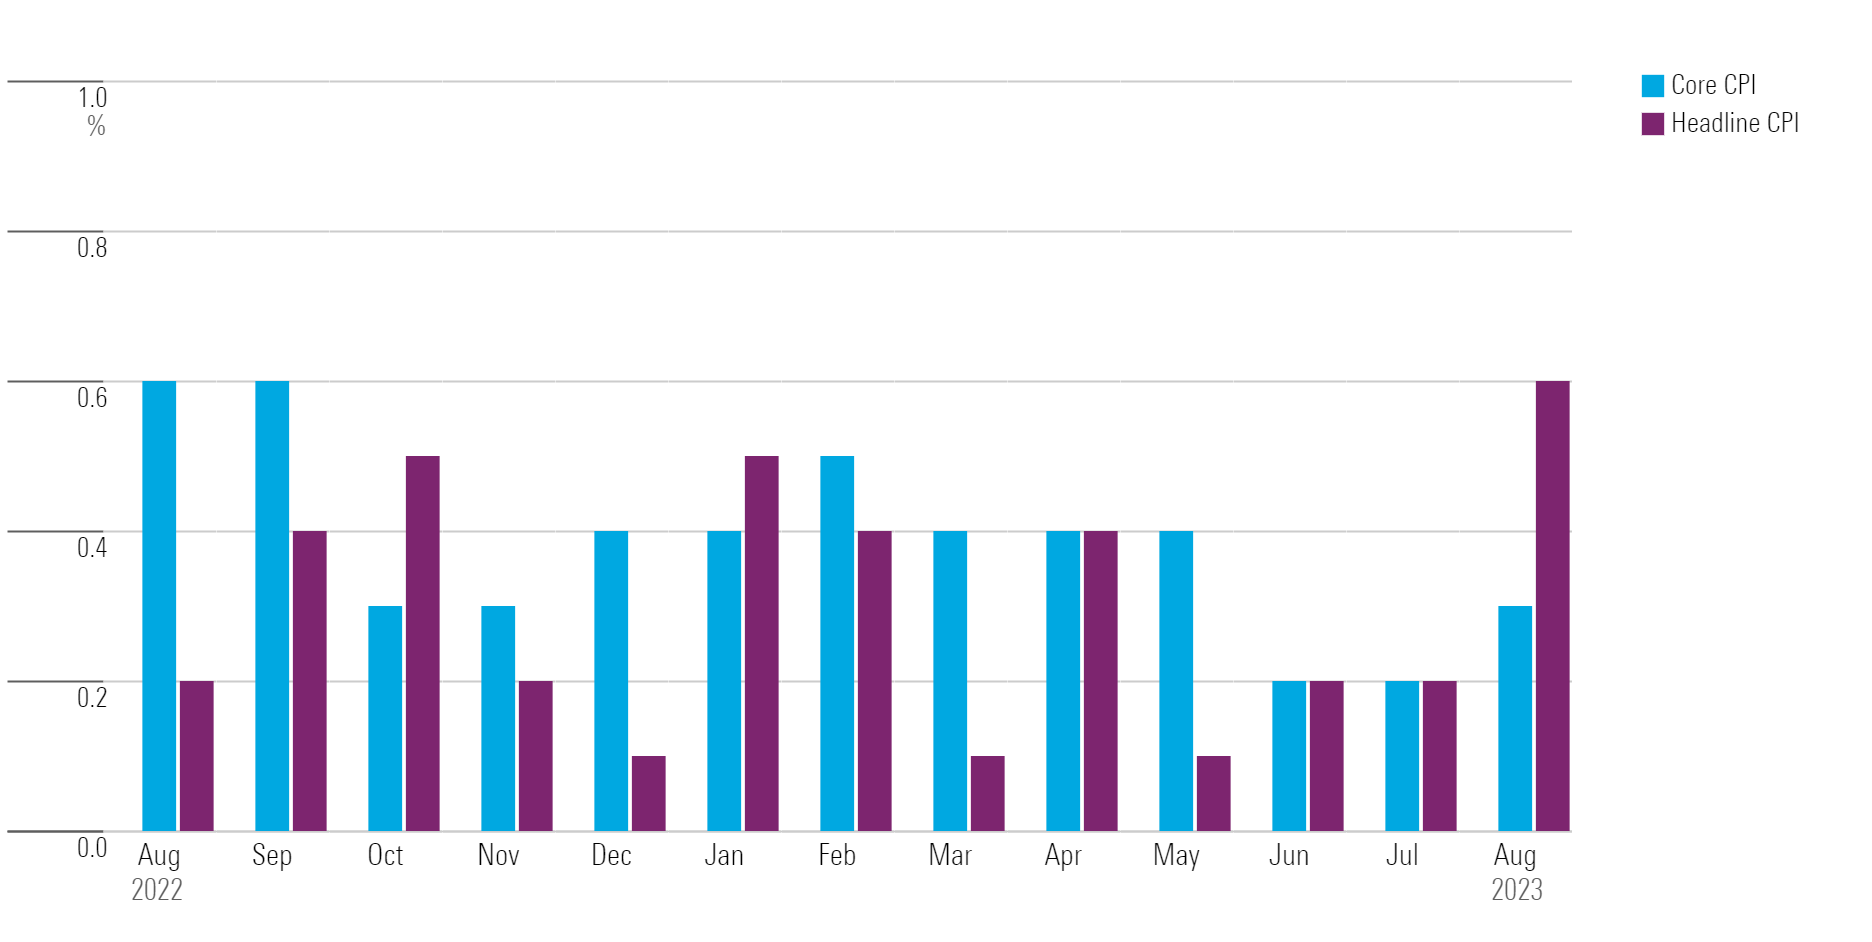 Bar chart showing consumer price index month-over-month changes.